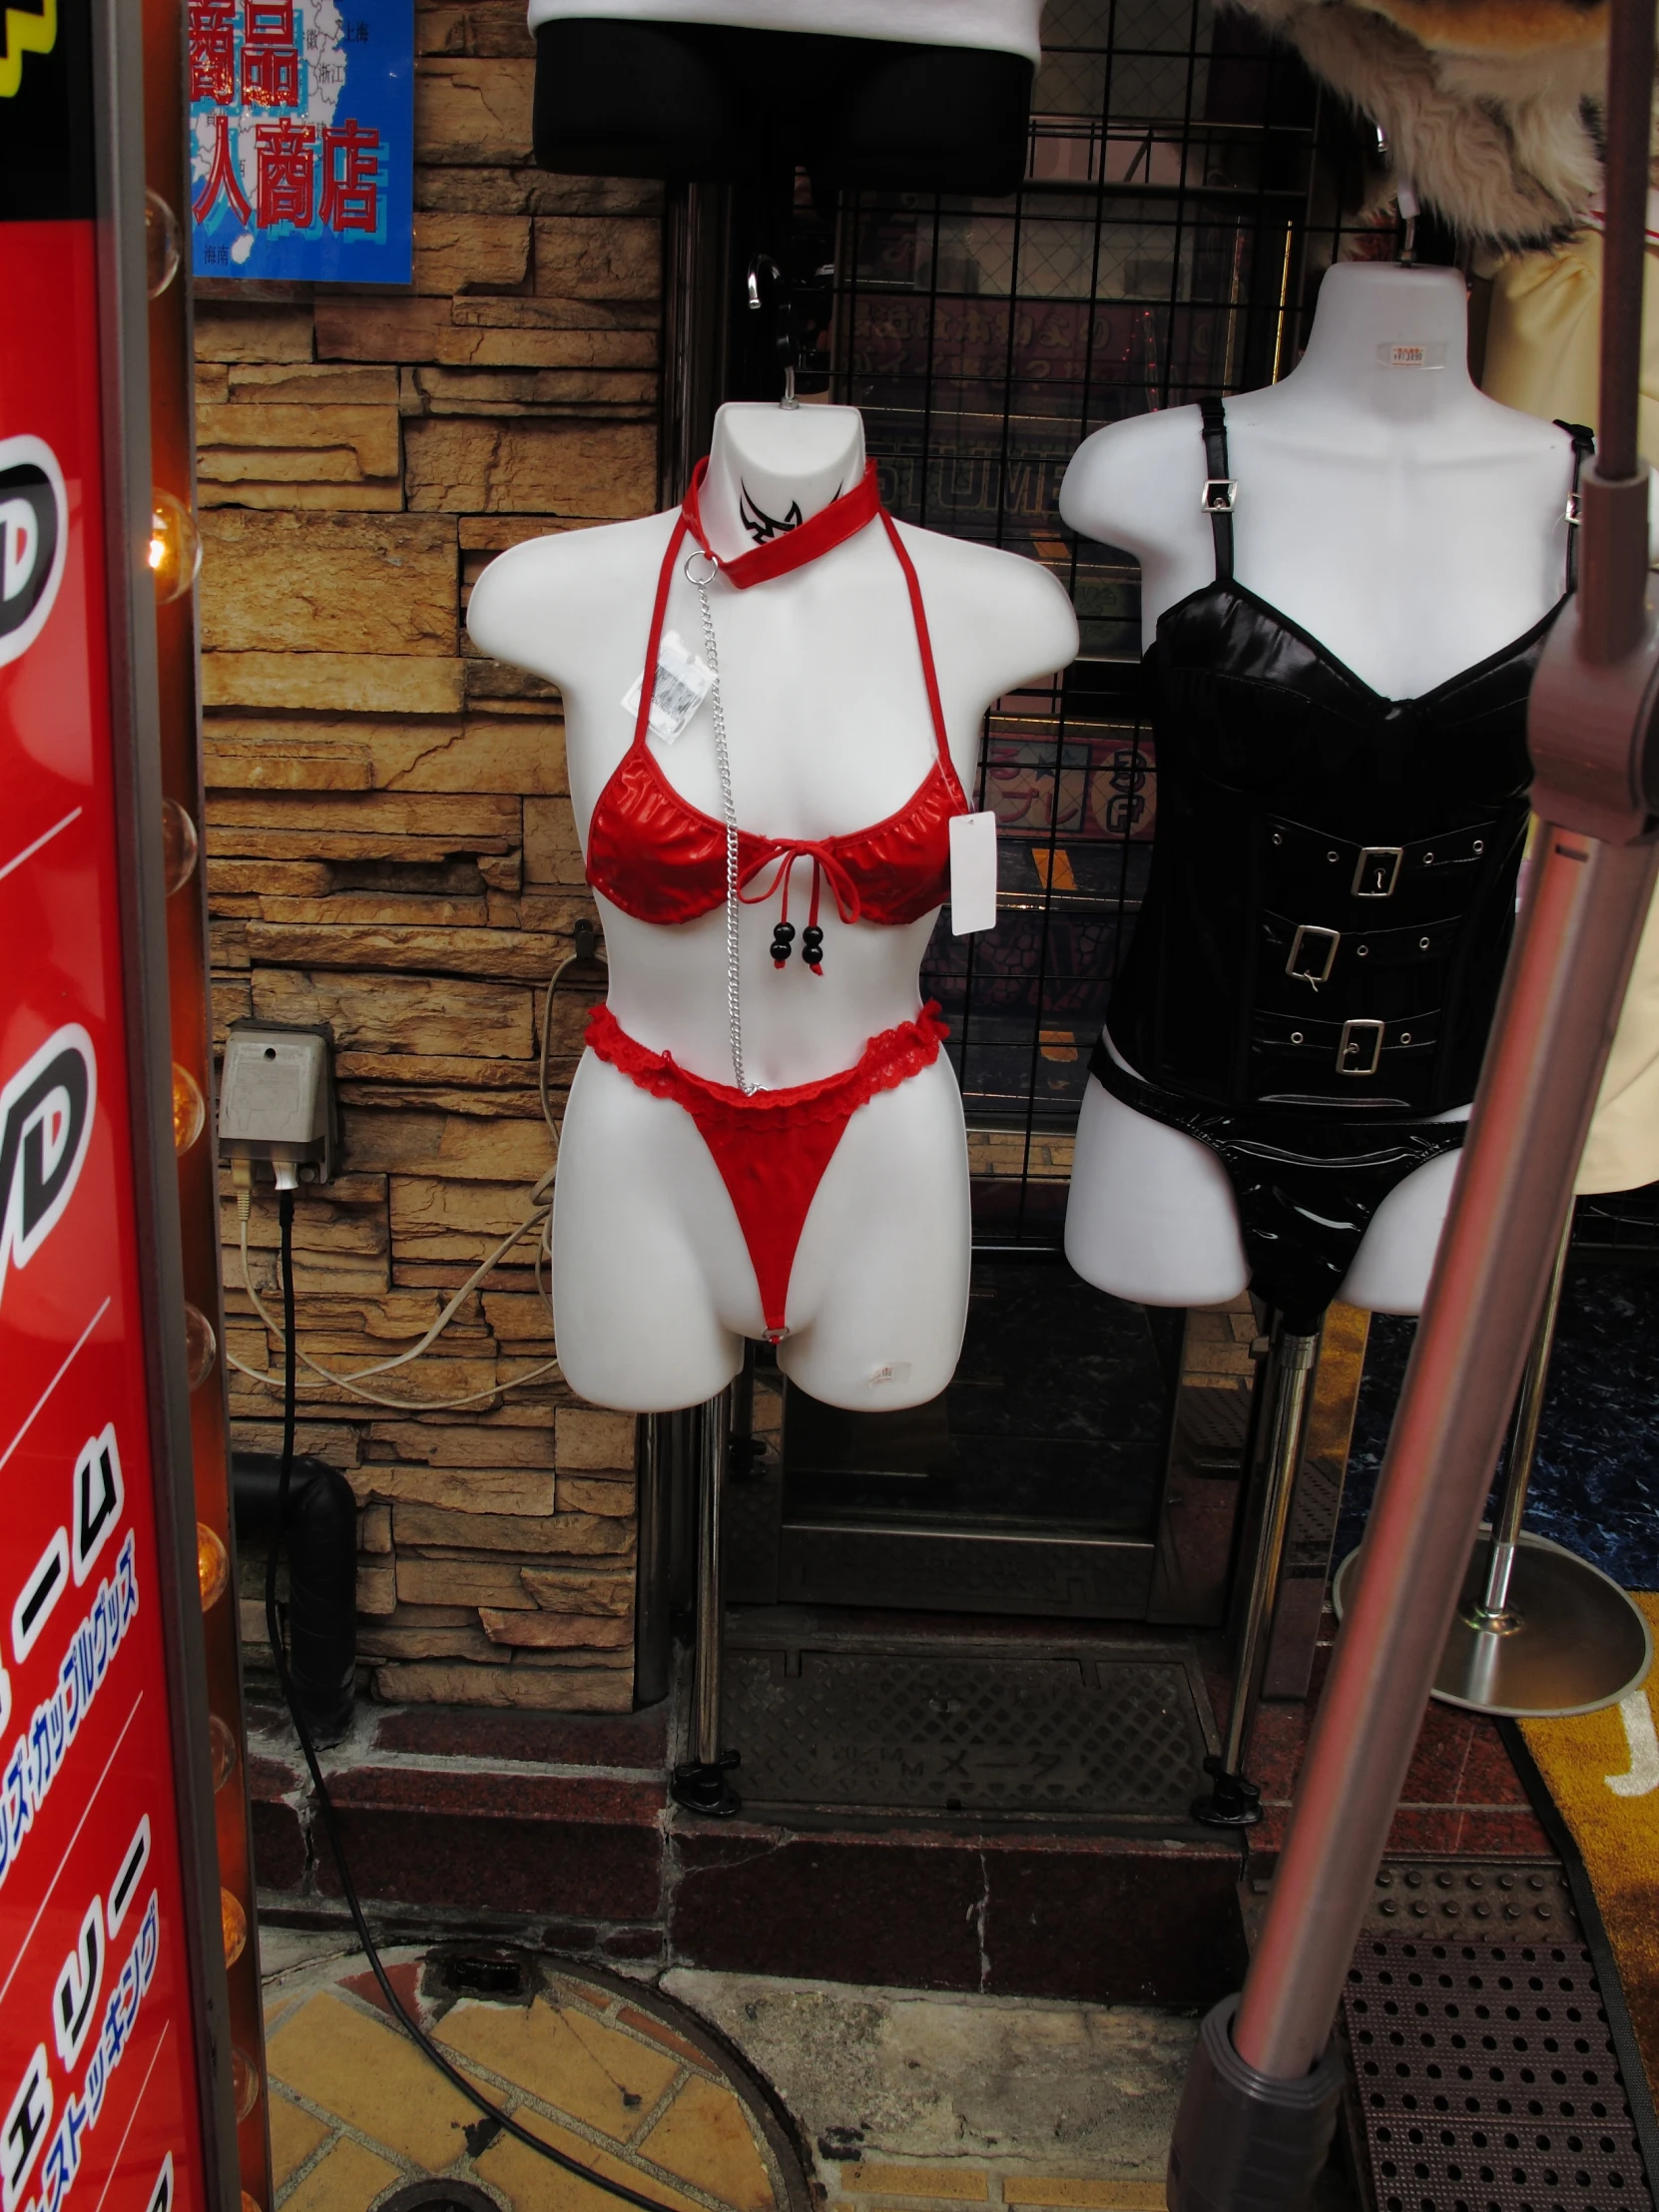 two female mannequins in a shop display in a window